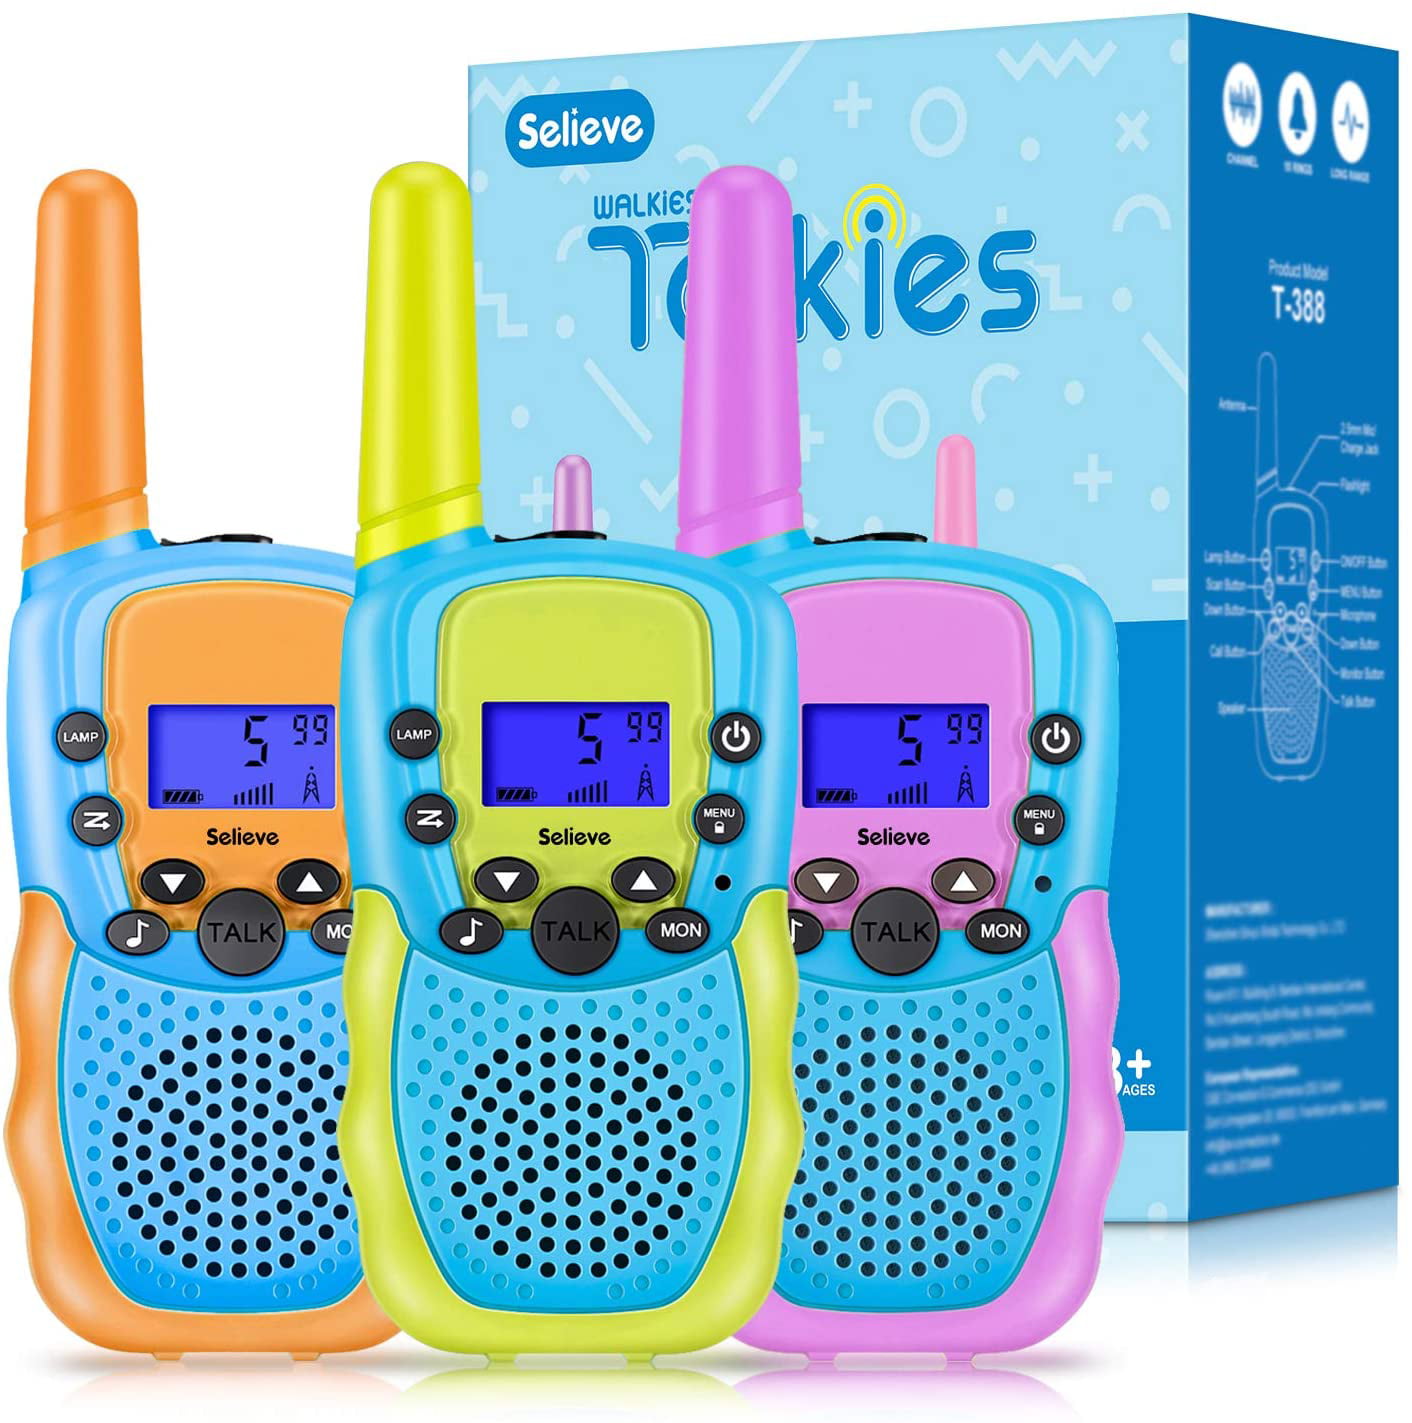 Protect Privacy Perfect Toy Gift for Boys Girls Up to 3KM Range Connection Easy Push-to-talk System Multifunction Kids Walkie Talkie Built-in Flashlight 22+99 Channels Walkie Talkies for Kids 